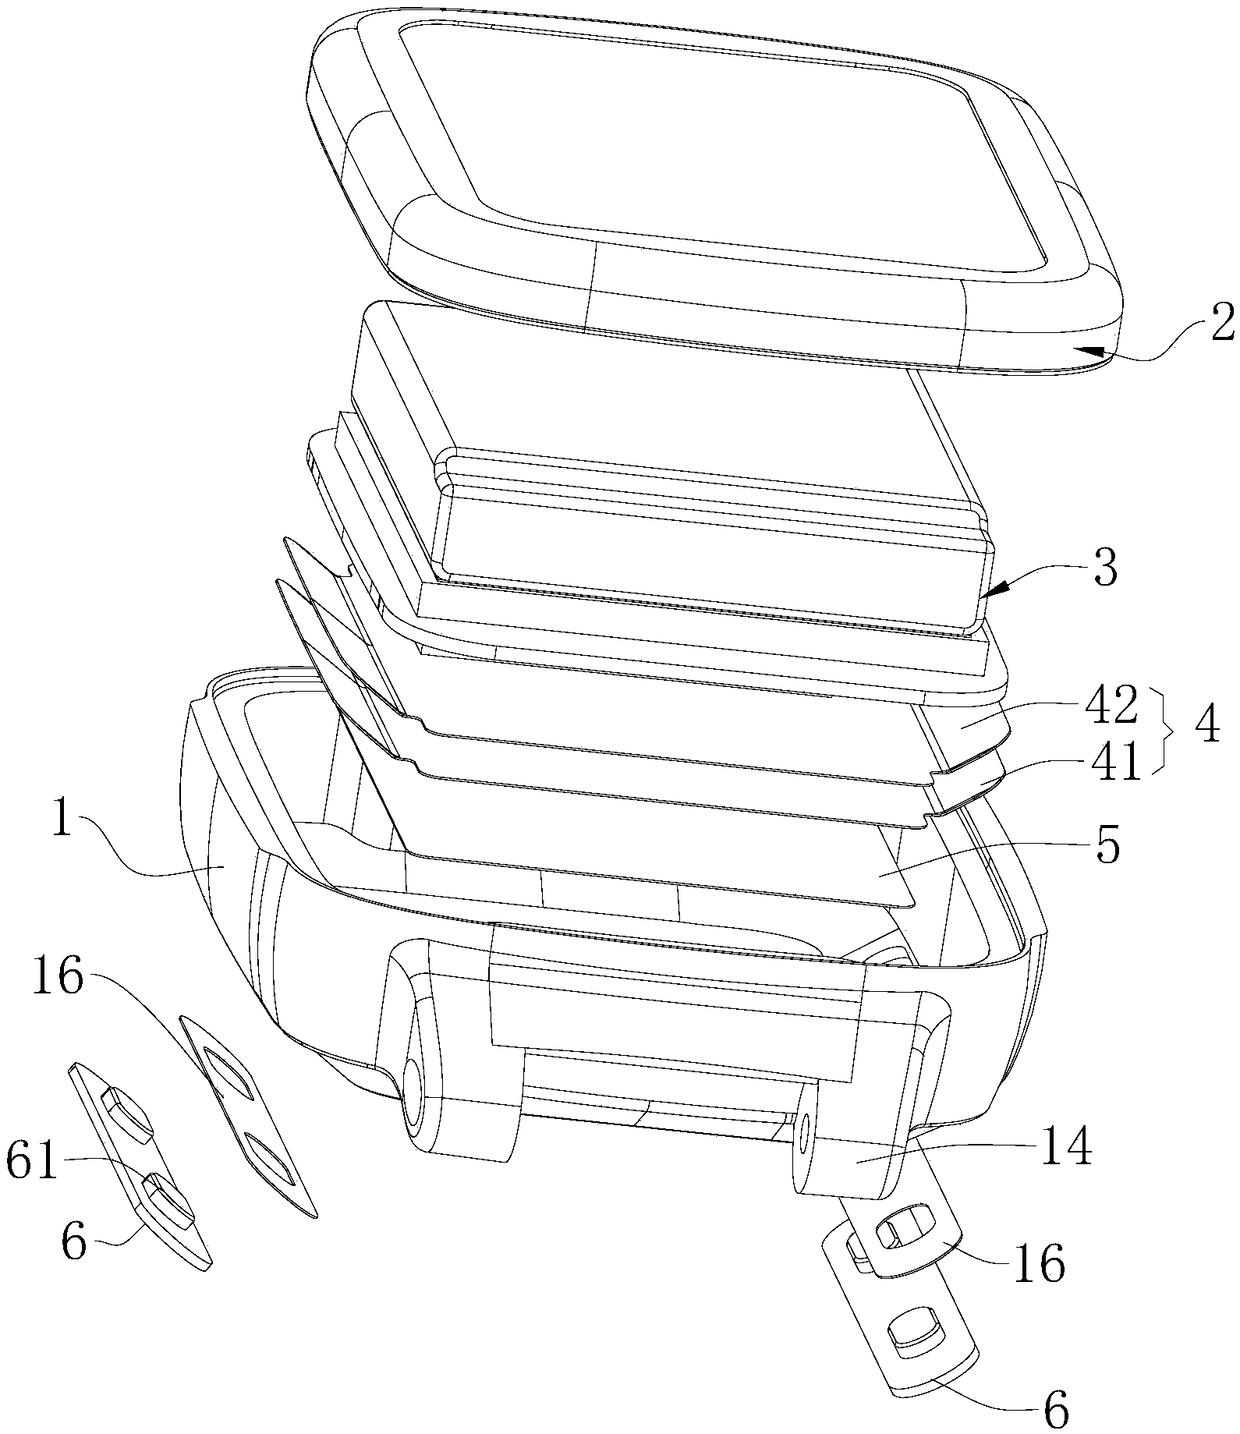 Heat dissipation structure of smart watch